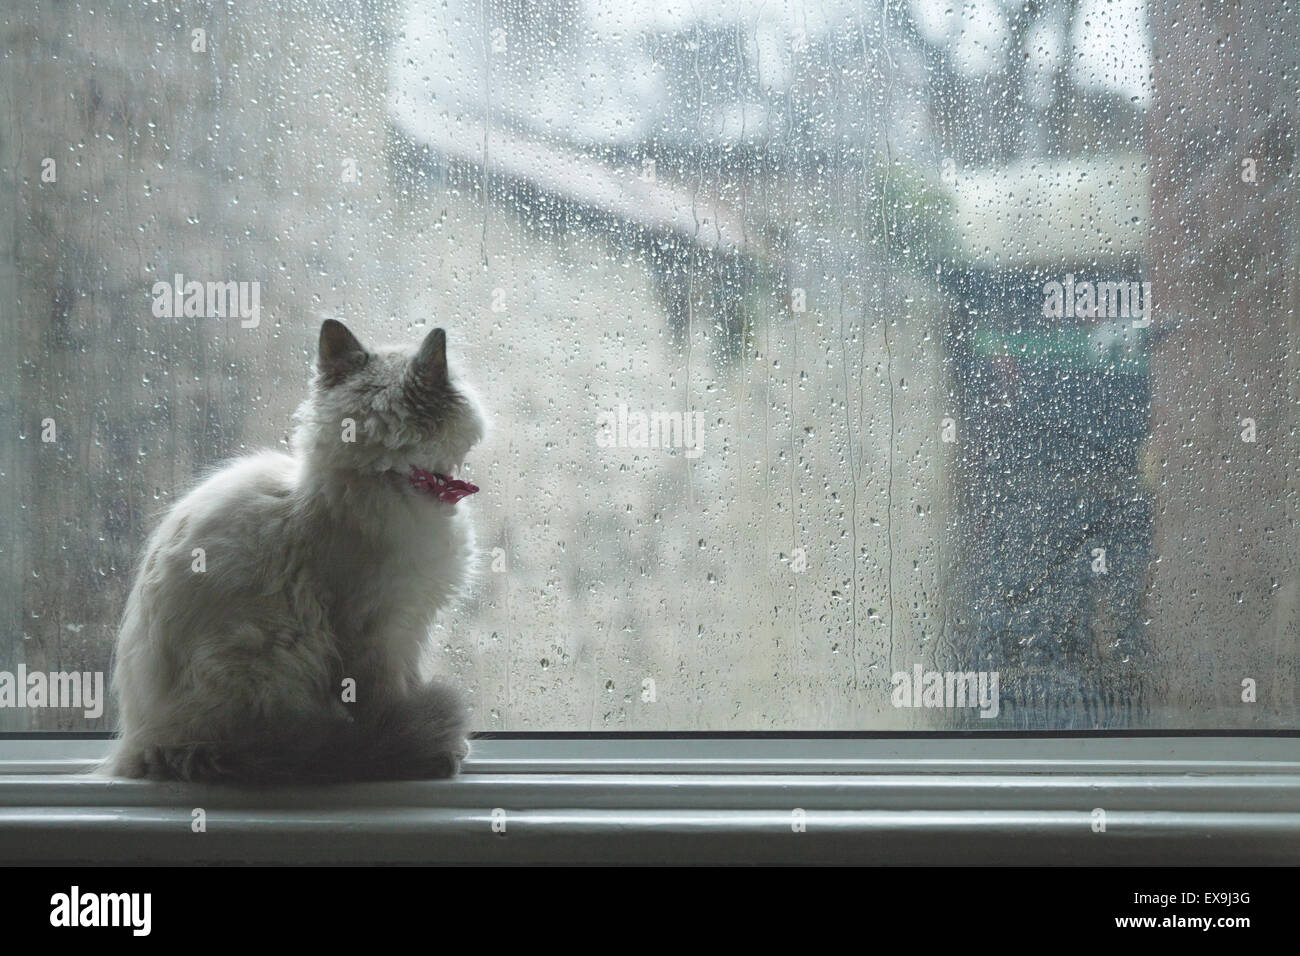 Cat sits on a window sill, looking outside through the rain covered glass, bearing connotations of loneliness, longing, sadness Stock Photo